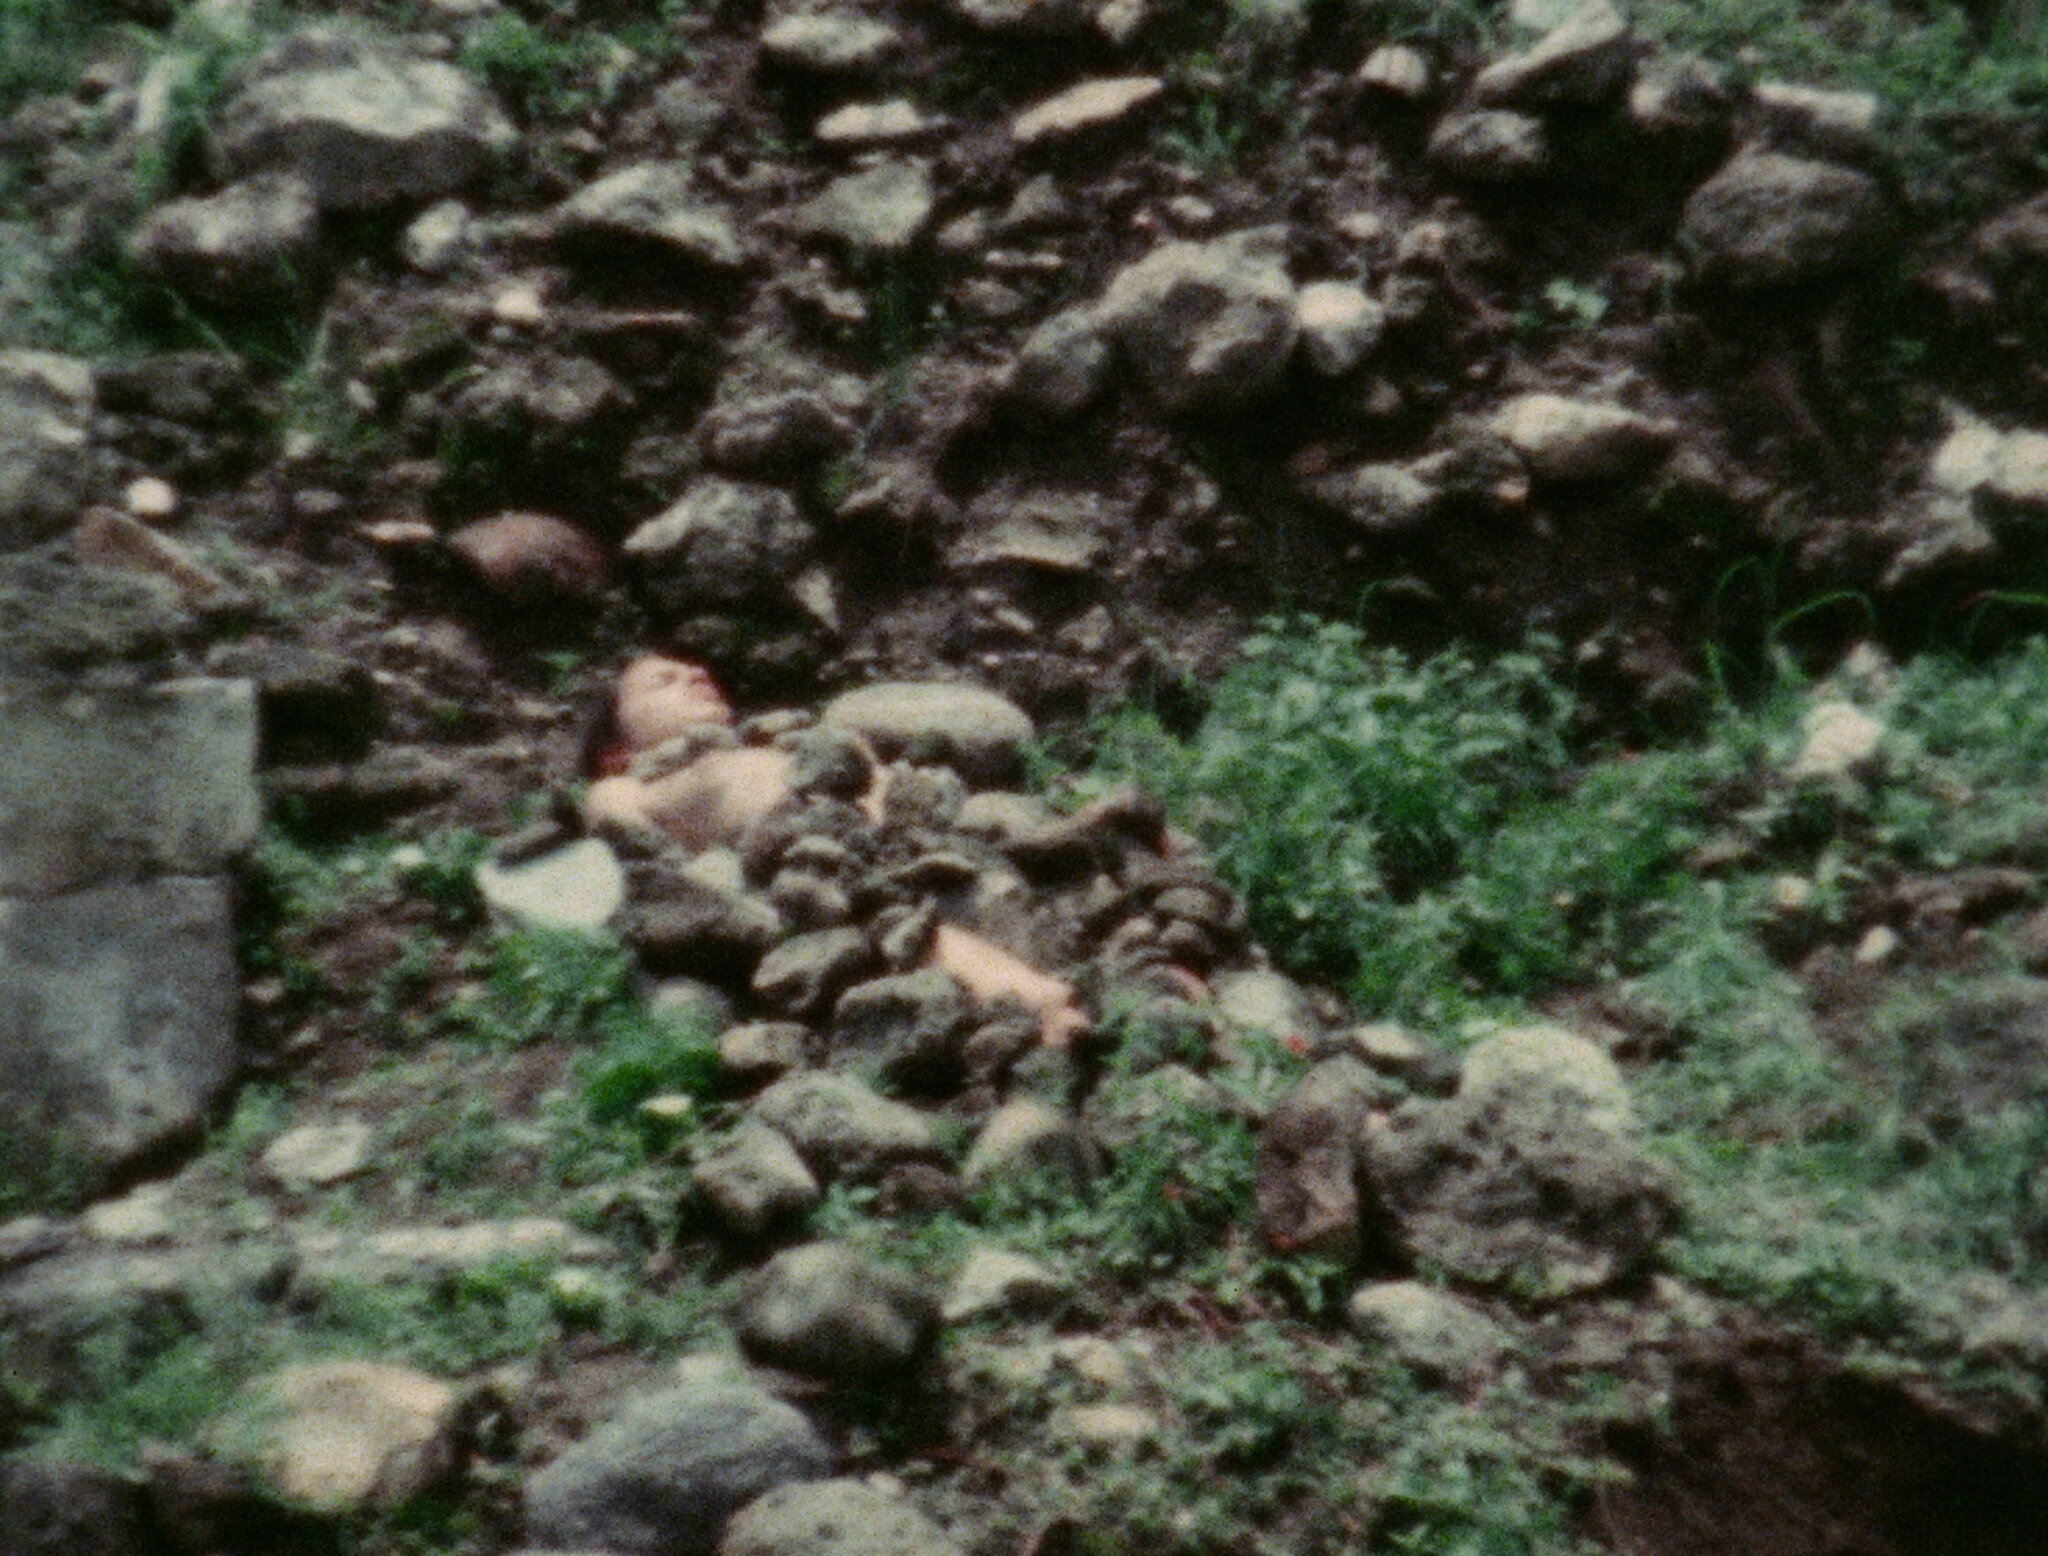  Ana Mendieta,  Burial Pyramid , 1974 Super-8mm film transferred to high-definition digital media, color, silent. Running time: 3:17 minutes. © The Estate of Ana Mendieta Collection, LLC. Courtesy Galerie Lelong &amp; Co. Licensed by Artists Rights S